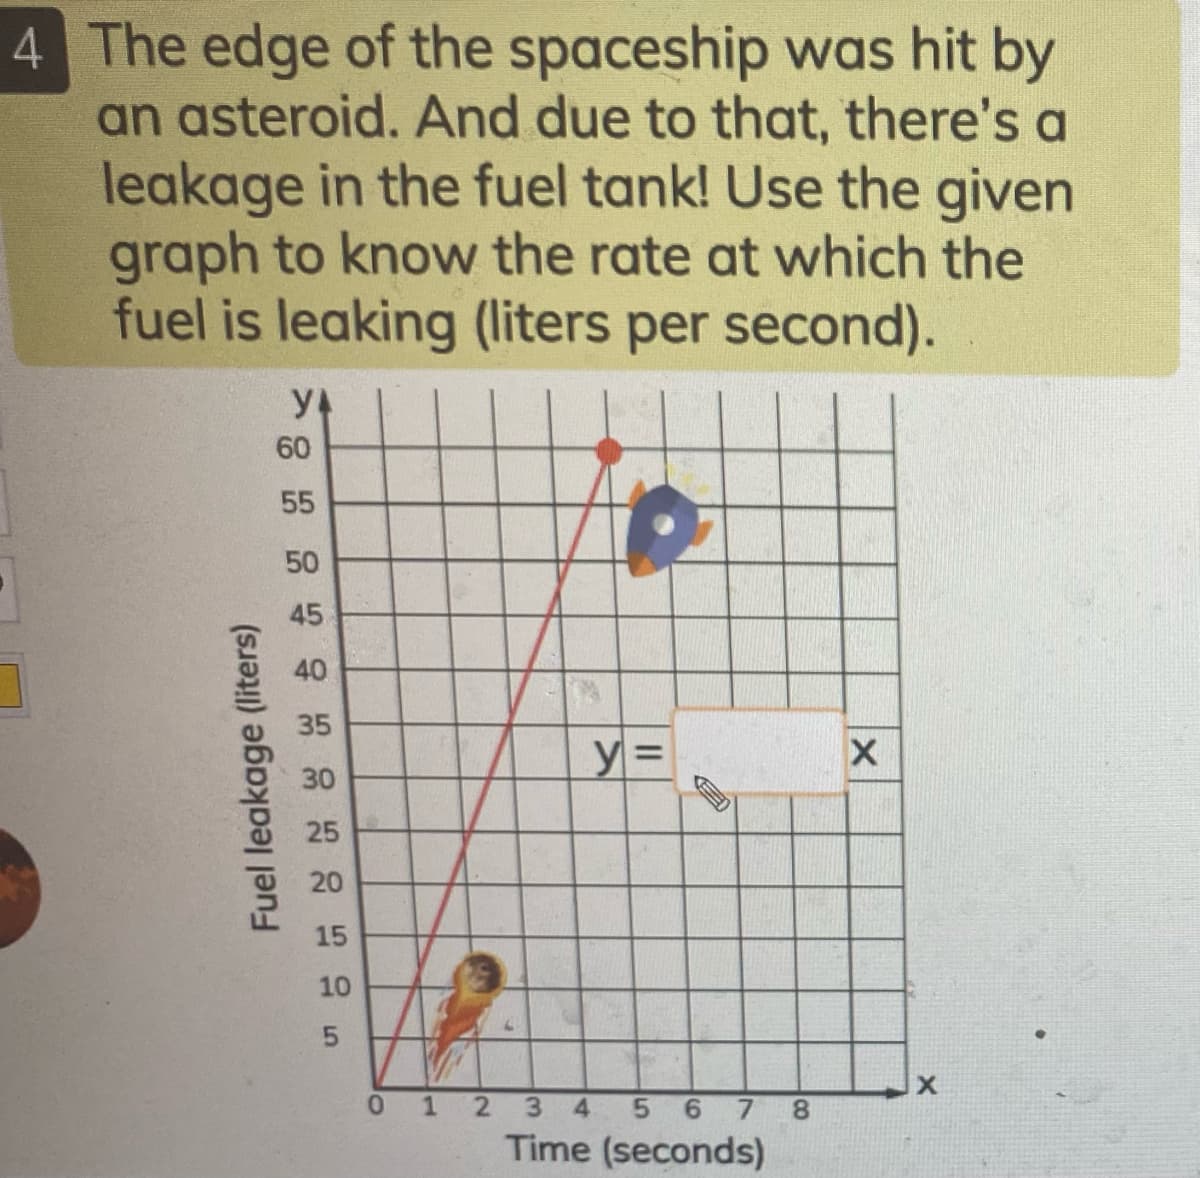 4 The edge of the spaceship was hit by
an asteroid. And due to that, there's a
leakage in the fuel tank! Use the given
graph to know the rate at which the
fuel is leaking (liters per second).
60
55
50
45
40
35
%3D
30
25
20
15
10
0 1 2
4
8.
Time (seconds)
Fuel leakage (liters)
